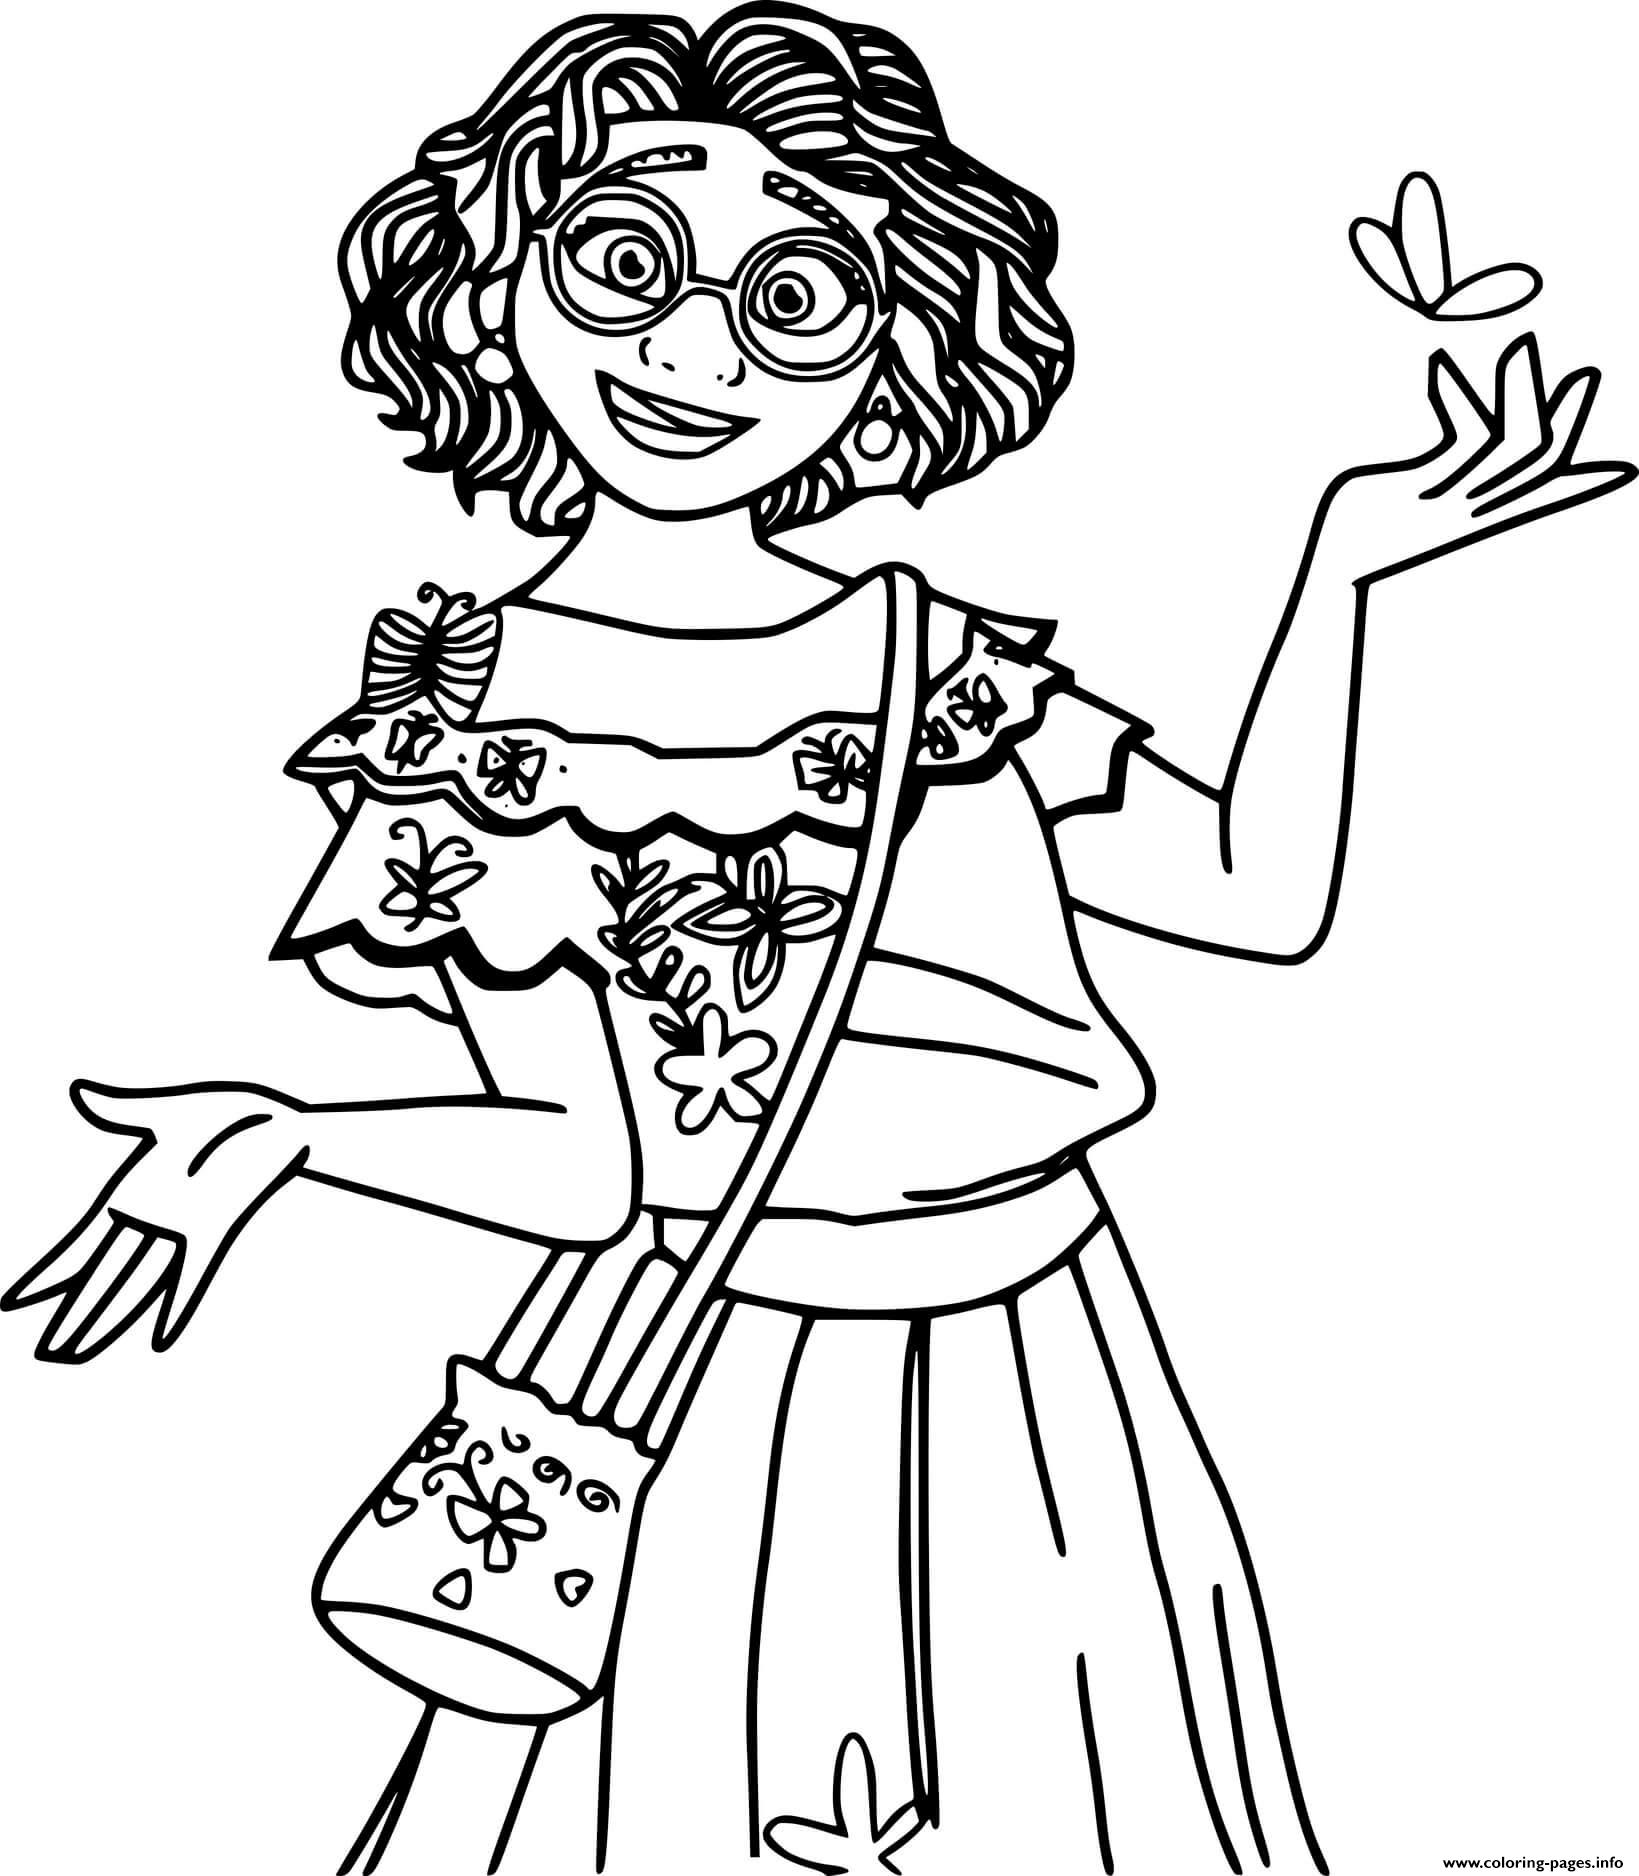 Mirabel Carrying A Bag Coloring page Printable